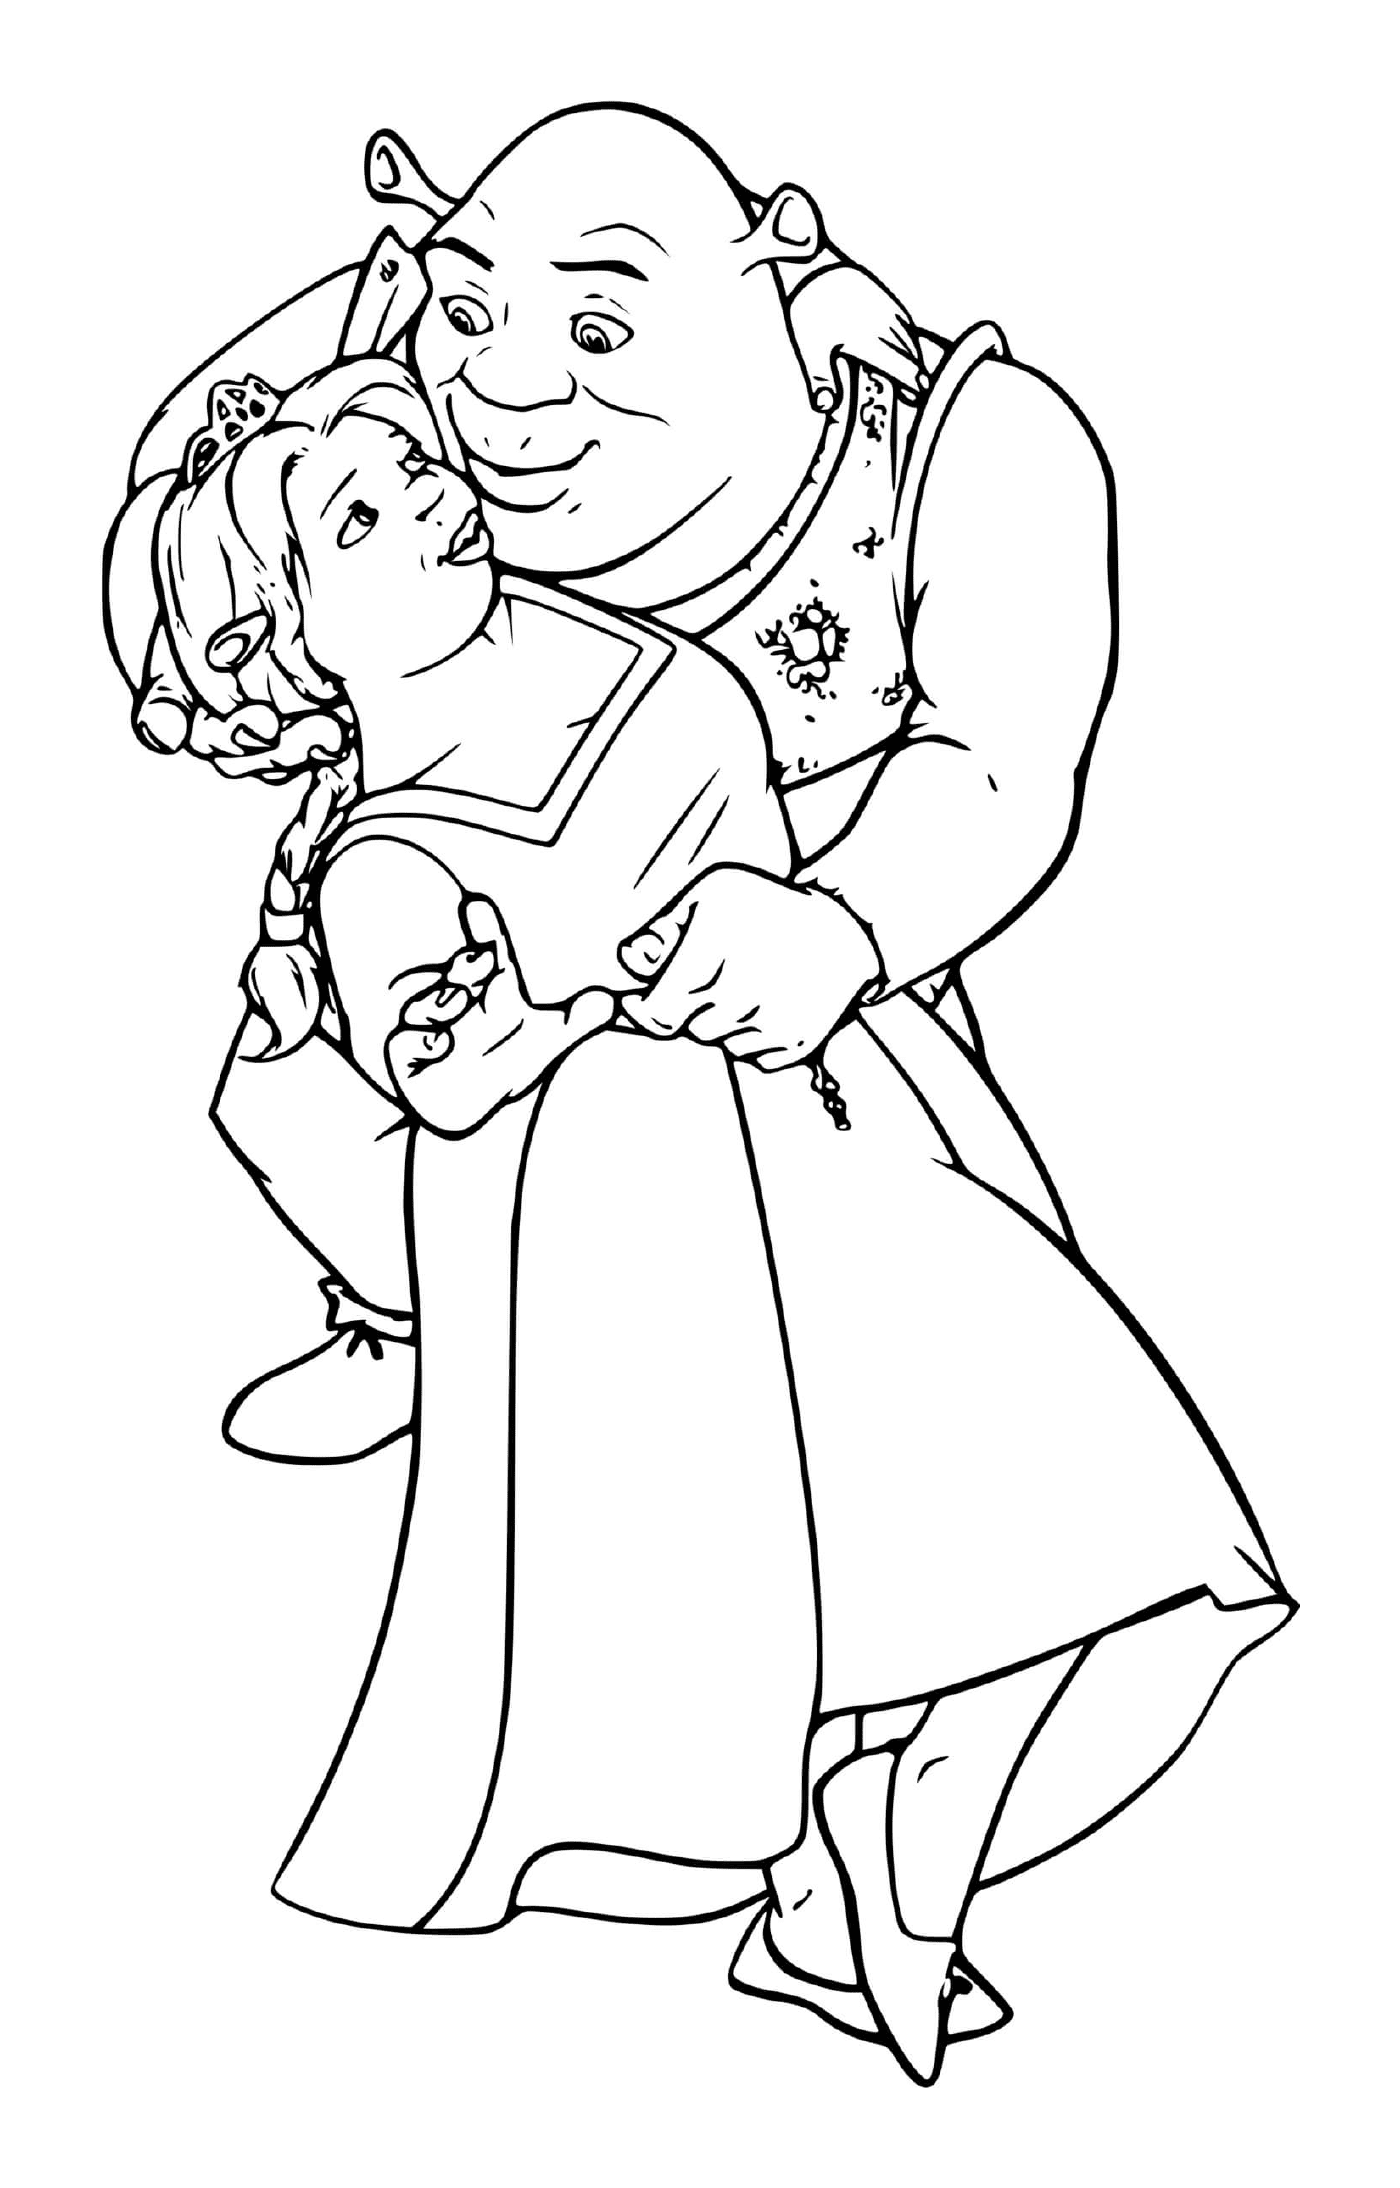  An old man holding a little girl in his arms 